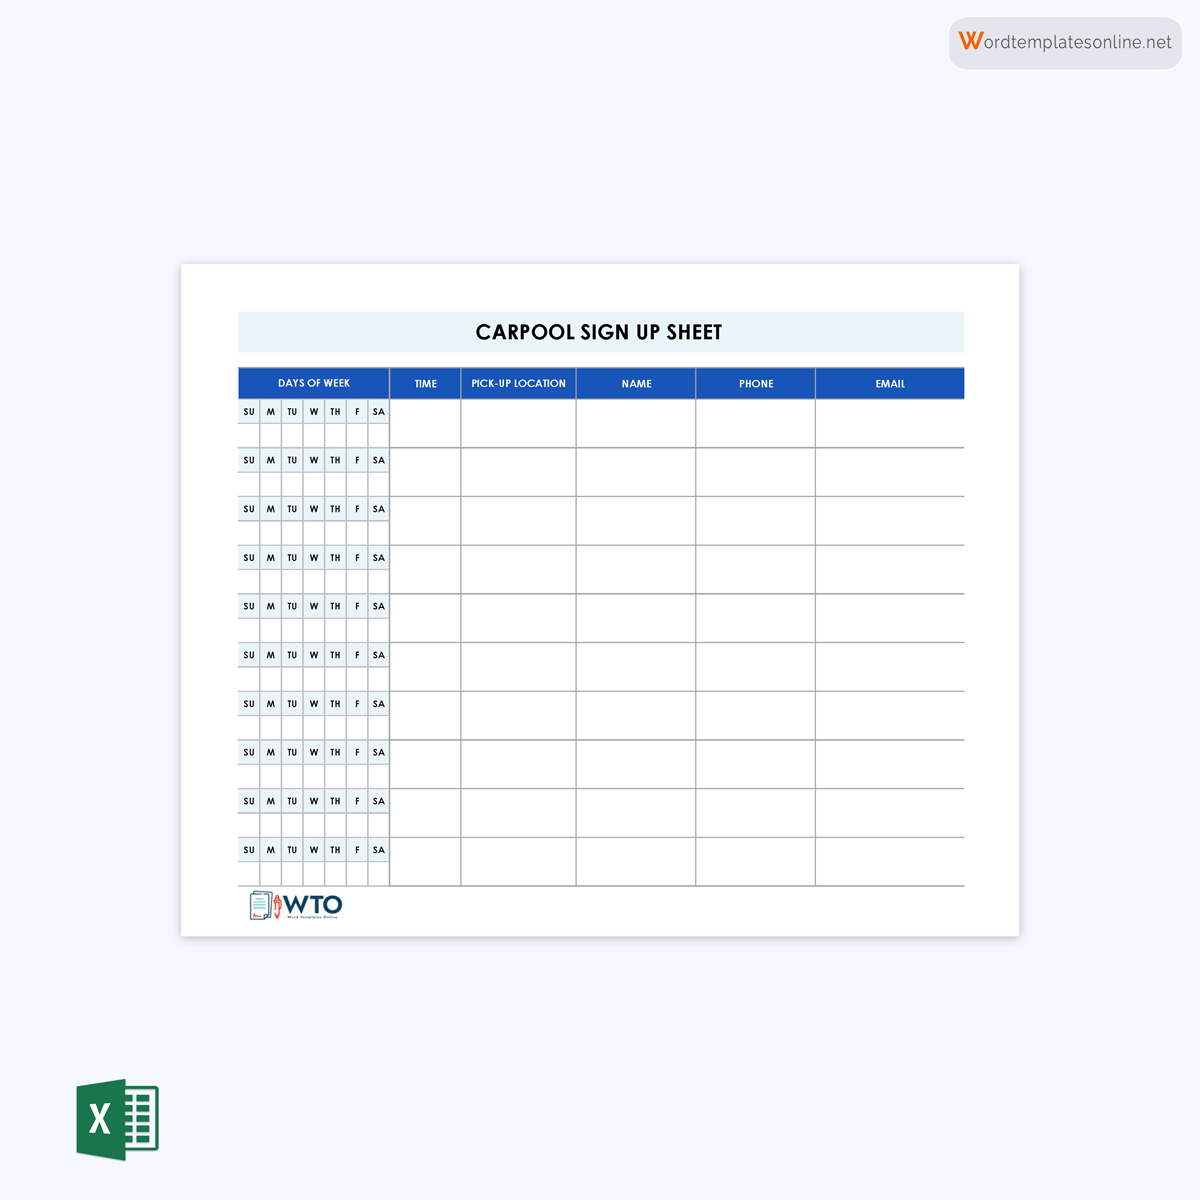 Free Carpool Sign-Up Sheet in Excel